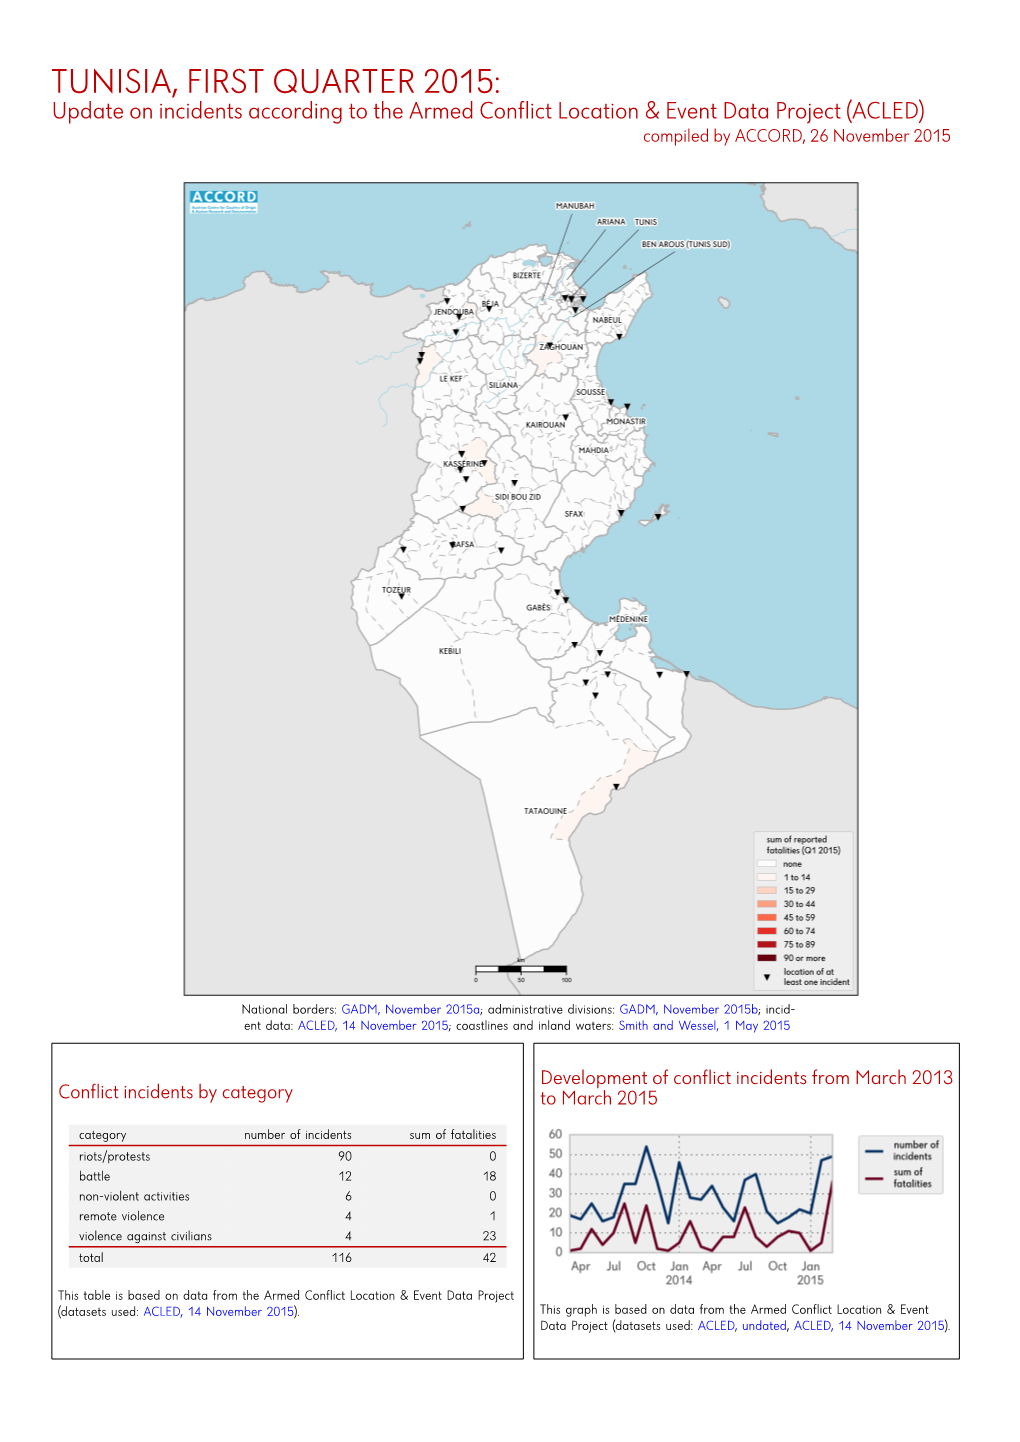 TUNISIA, FIRST QUARTER 2015: Update on Incidents According to the Armed Conflict Location & Event Data Project (ACLED) Compiled by ACCORD, 26 November 2015